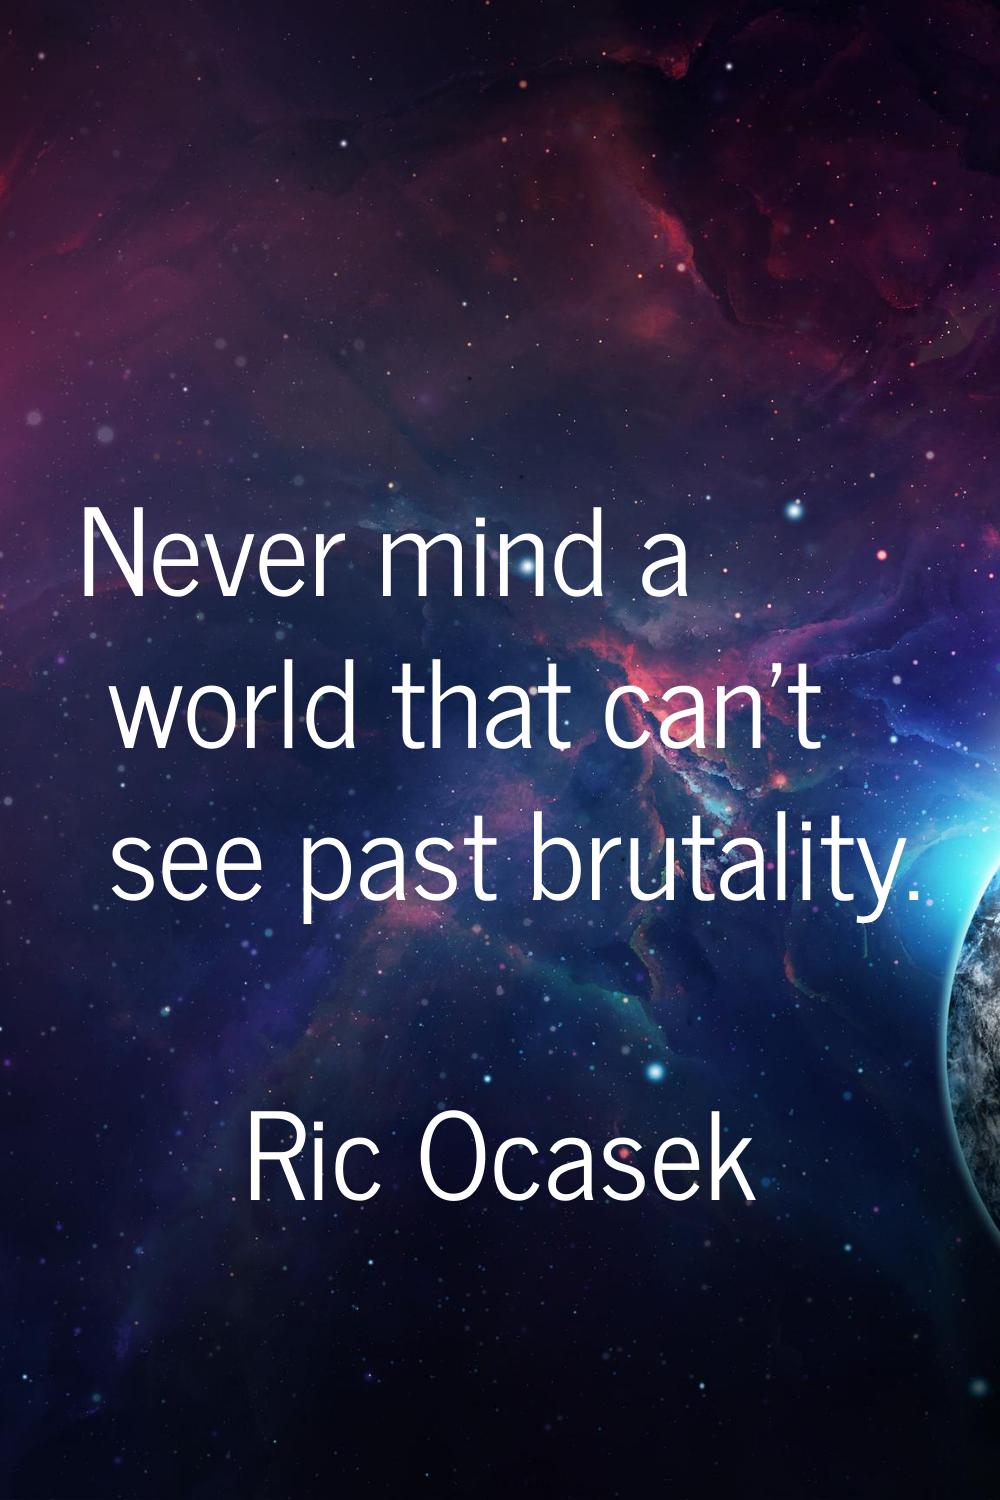 Never mind a world that can't see past brutality.